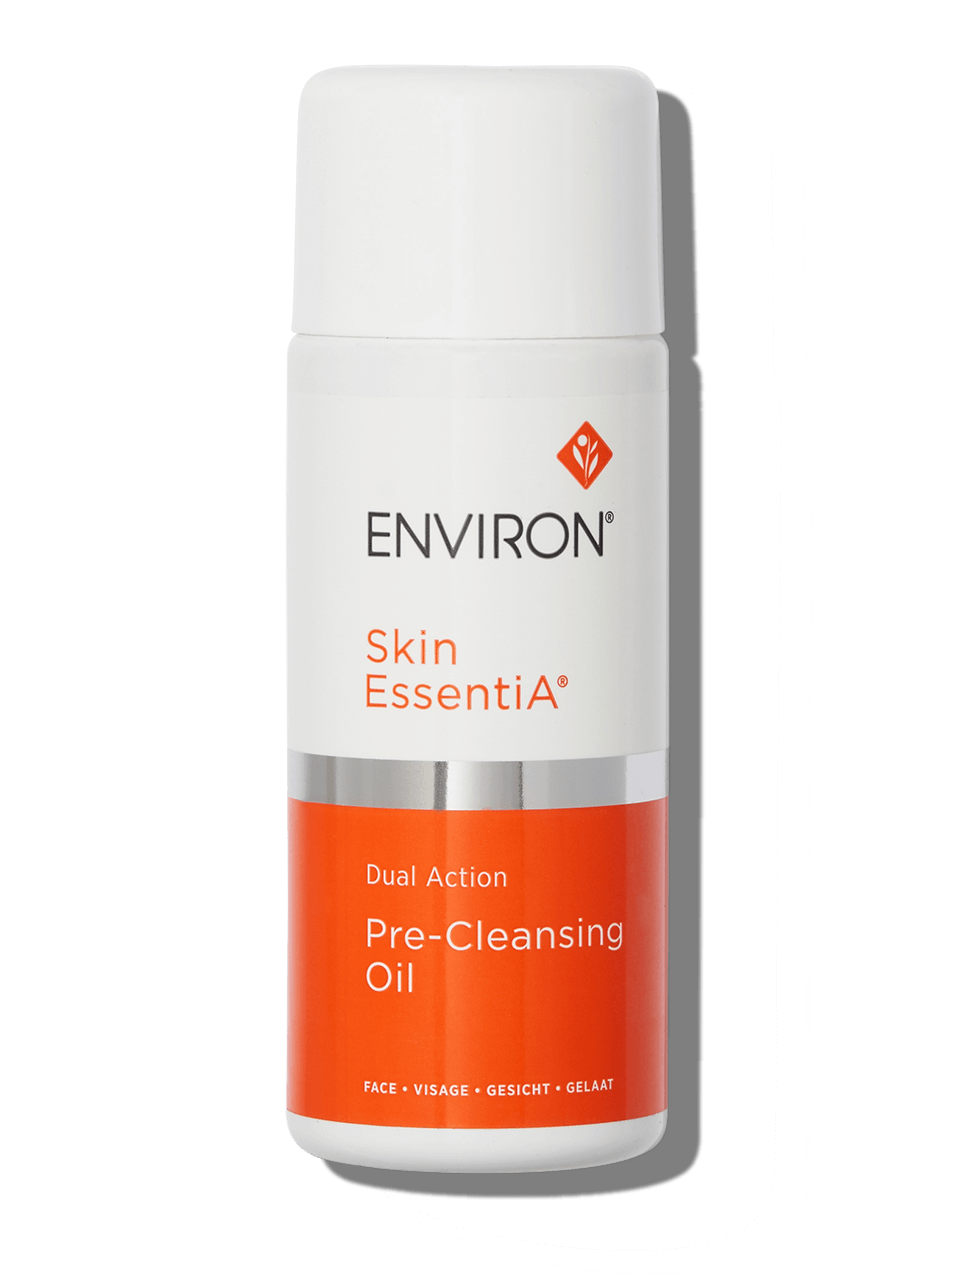 Dual Action Pre-Cleansing Oil SKINCARE Environ 